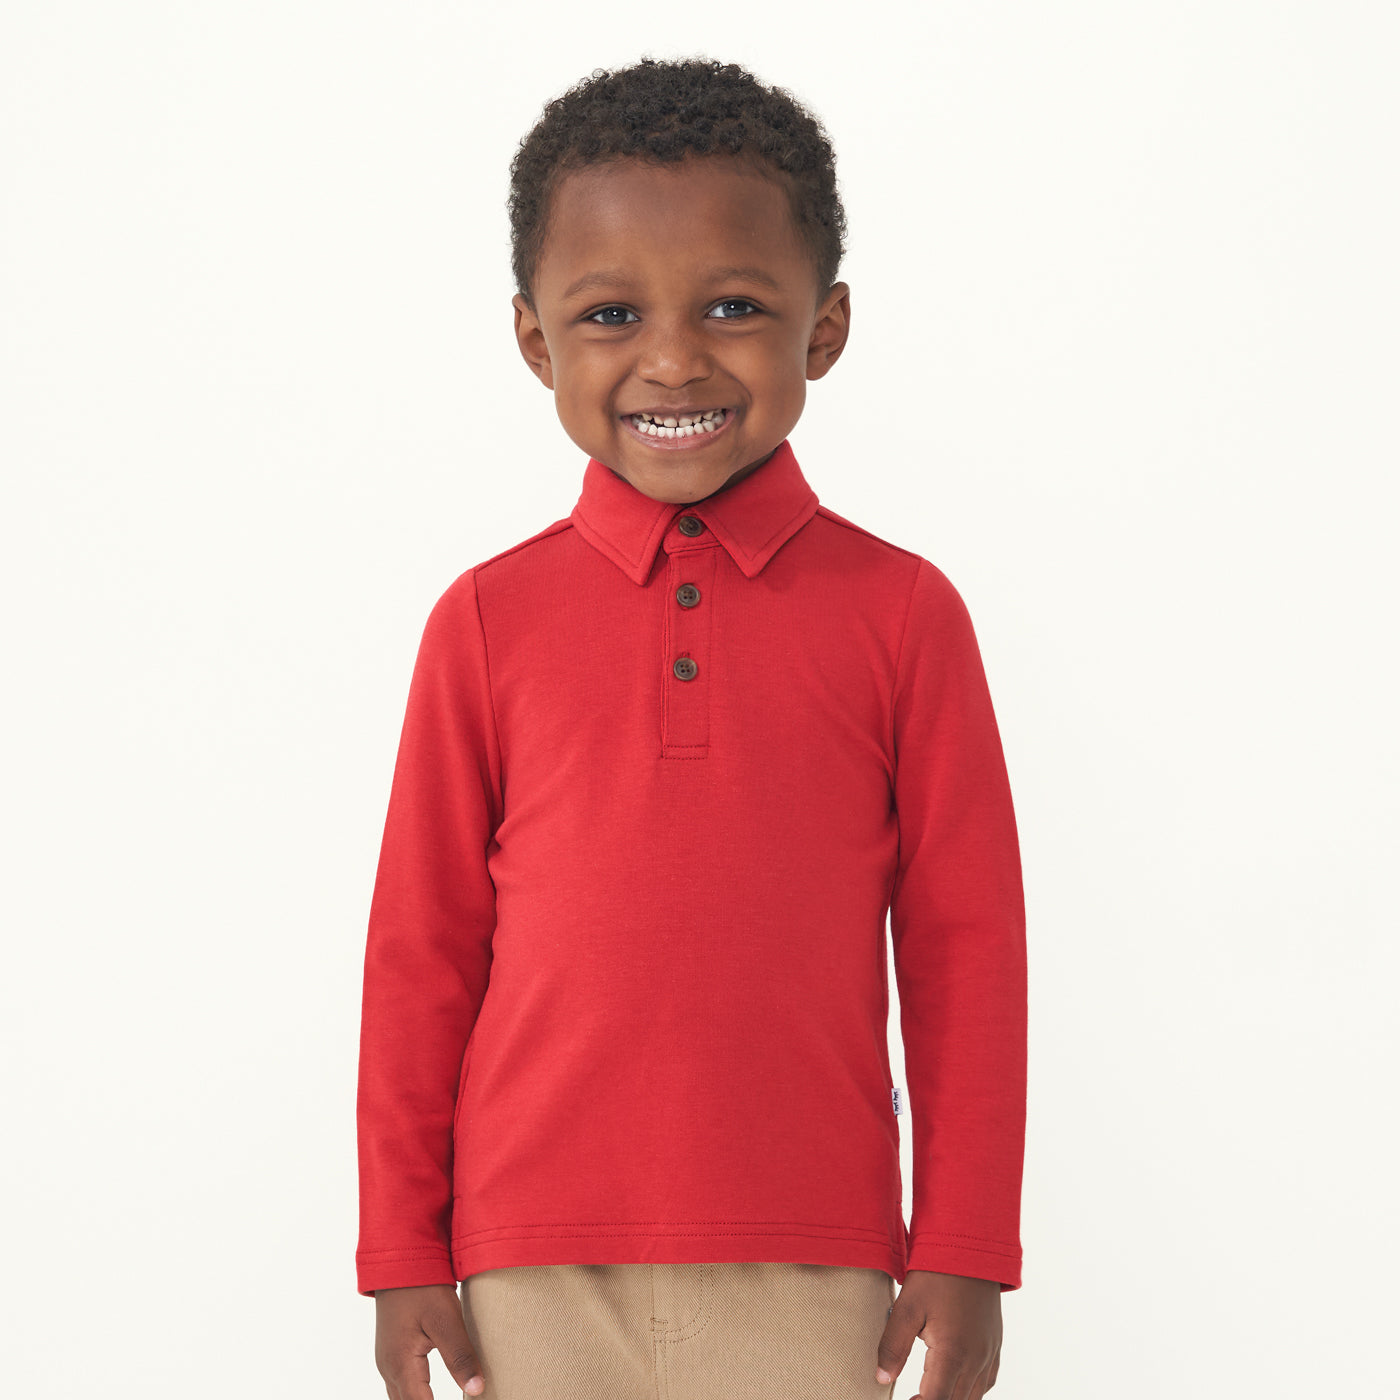 Child wearing a Holiday Red polo shirt